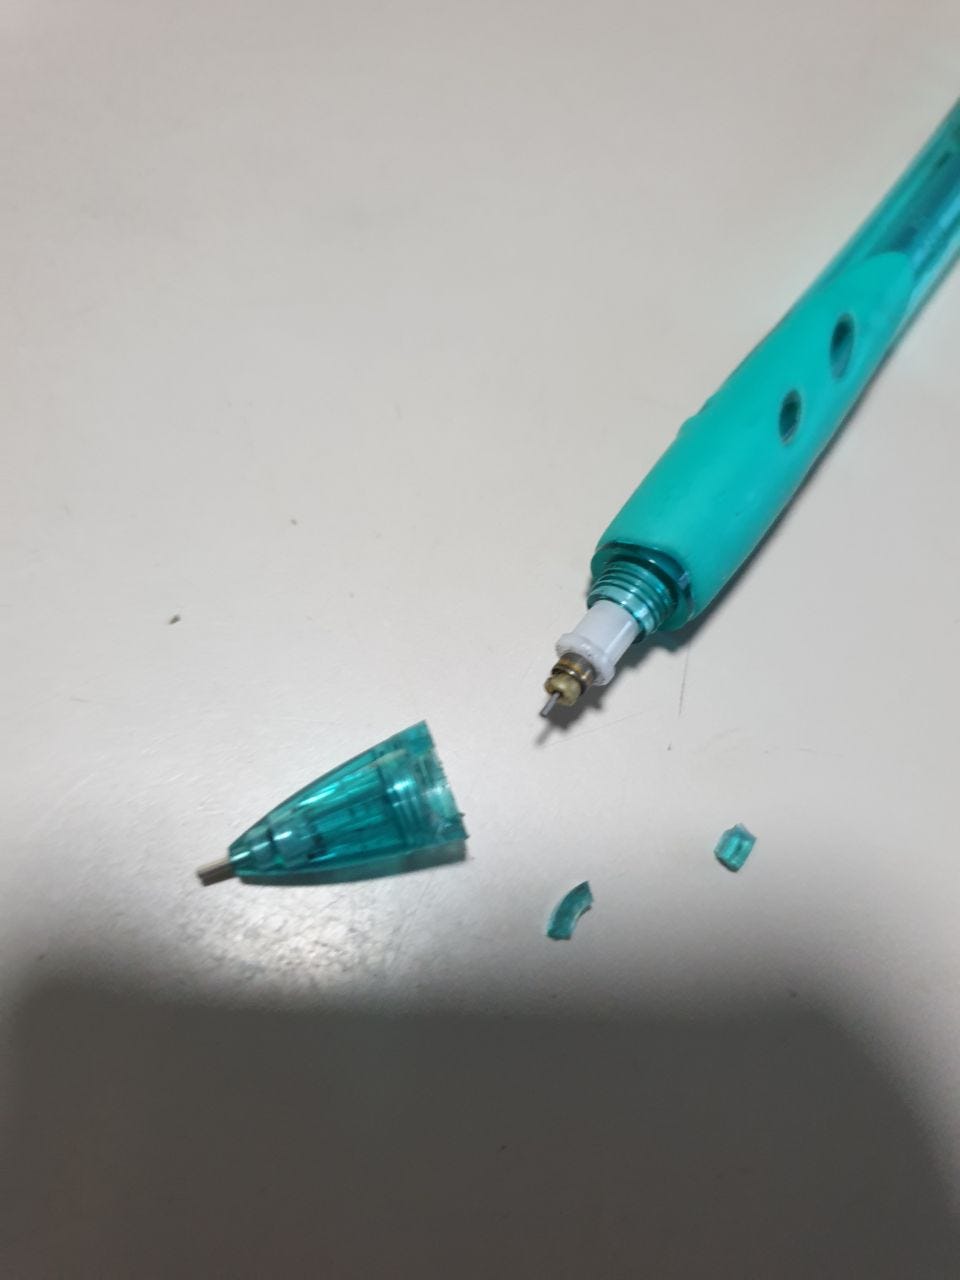 stationery - How to prevent violent expulsion of mechanical pencil tip -  Lifehacks Stack Exchange